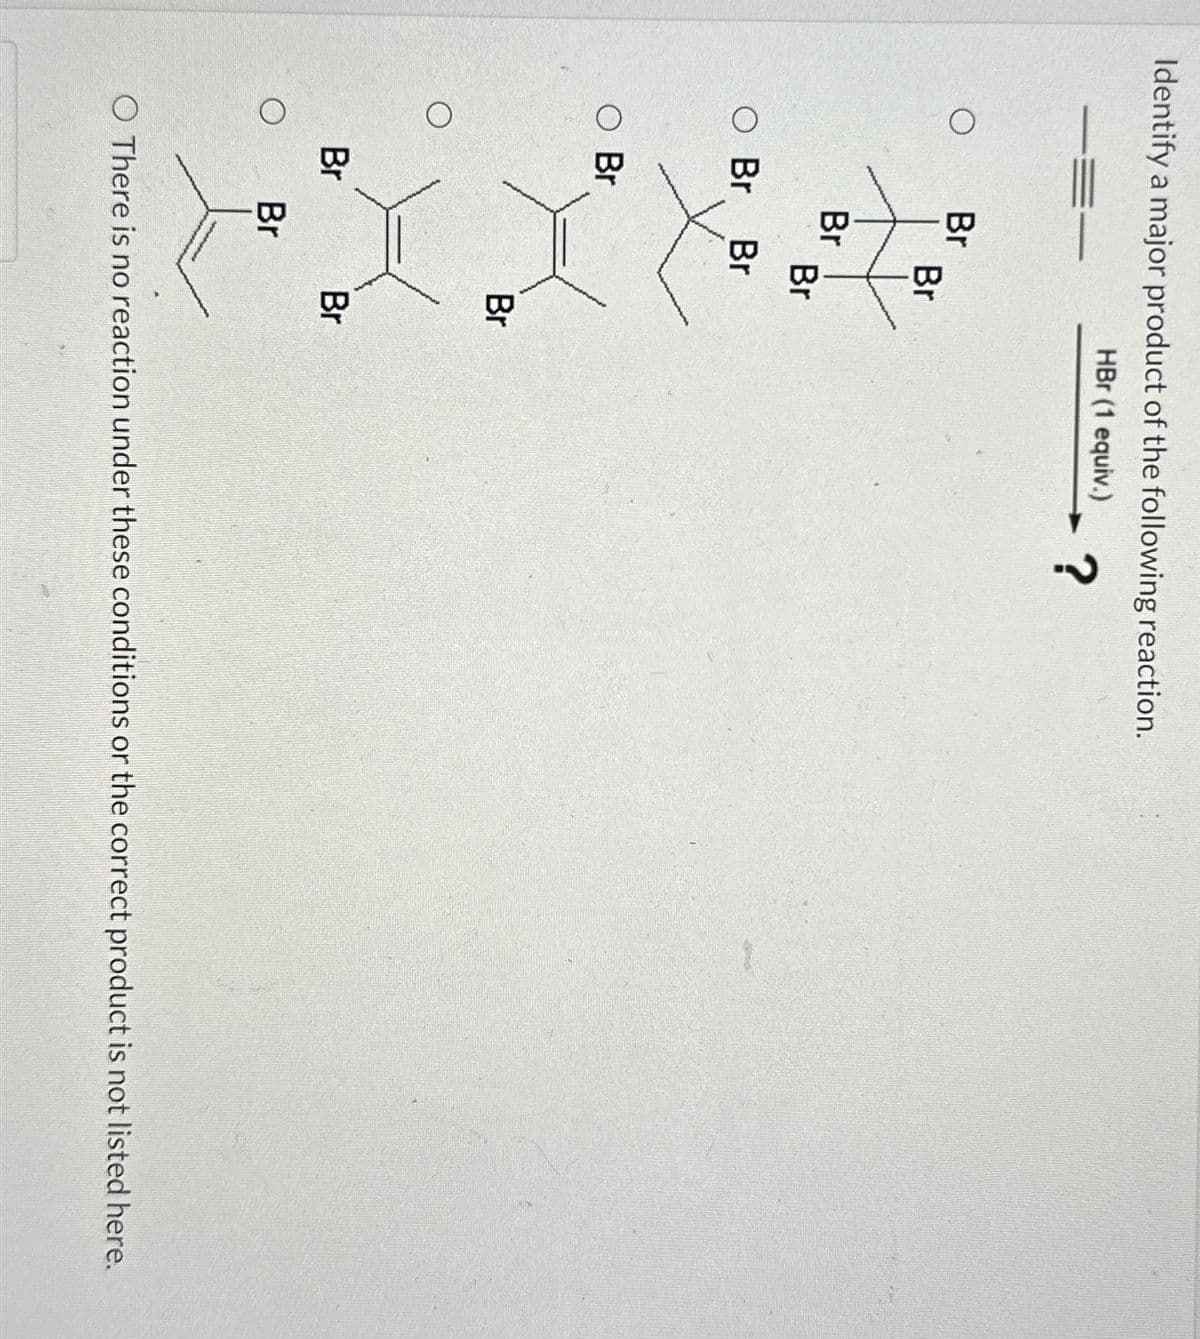 Identify a major product of the following reaction.
HBr (1 equiv.)
?
O
Br
Br
Br
Br
○ Br Br
○ Br
Br
Br
Br
Br
O There is no reaction under these conditions or the correct product is not listed here.